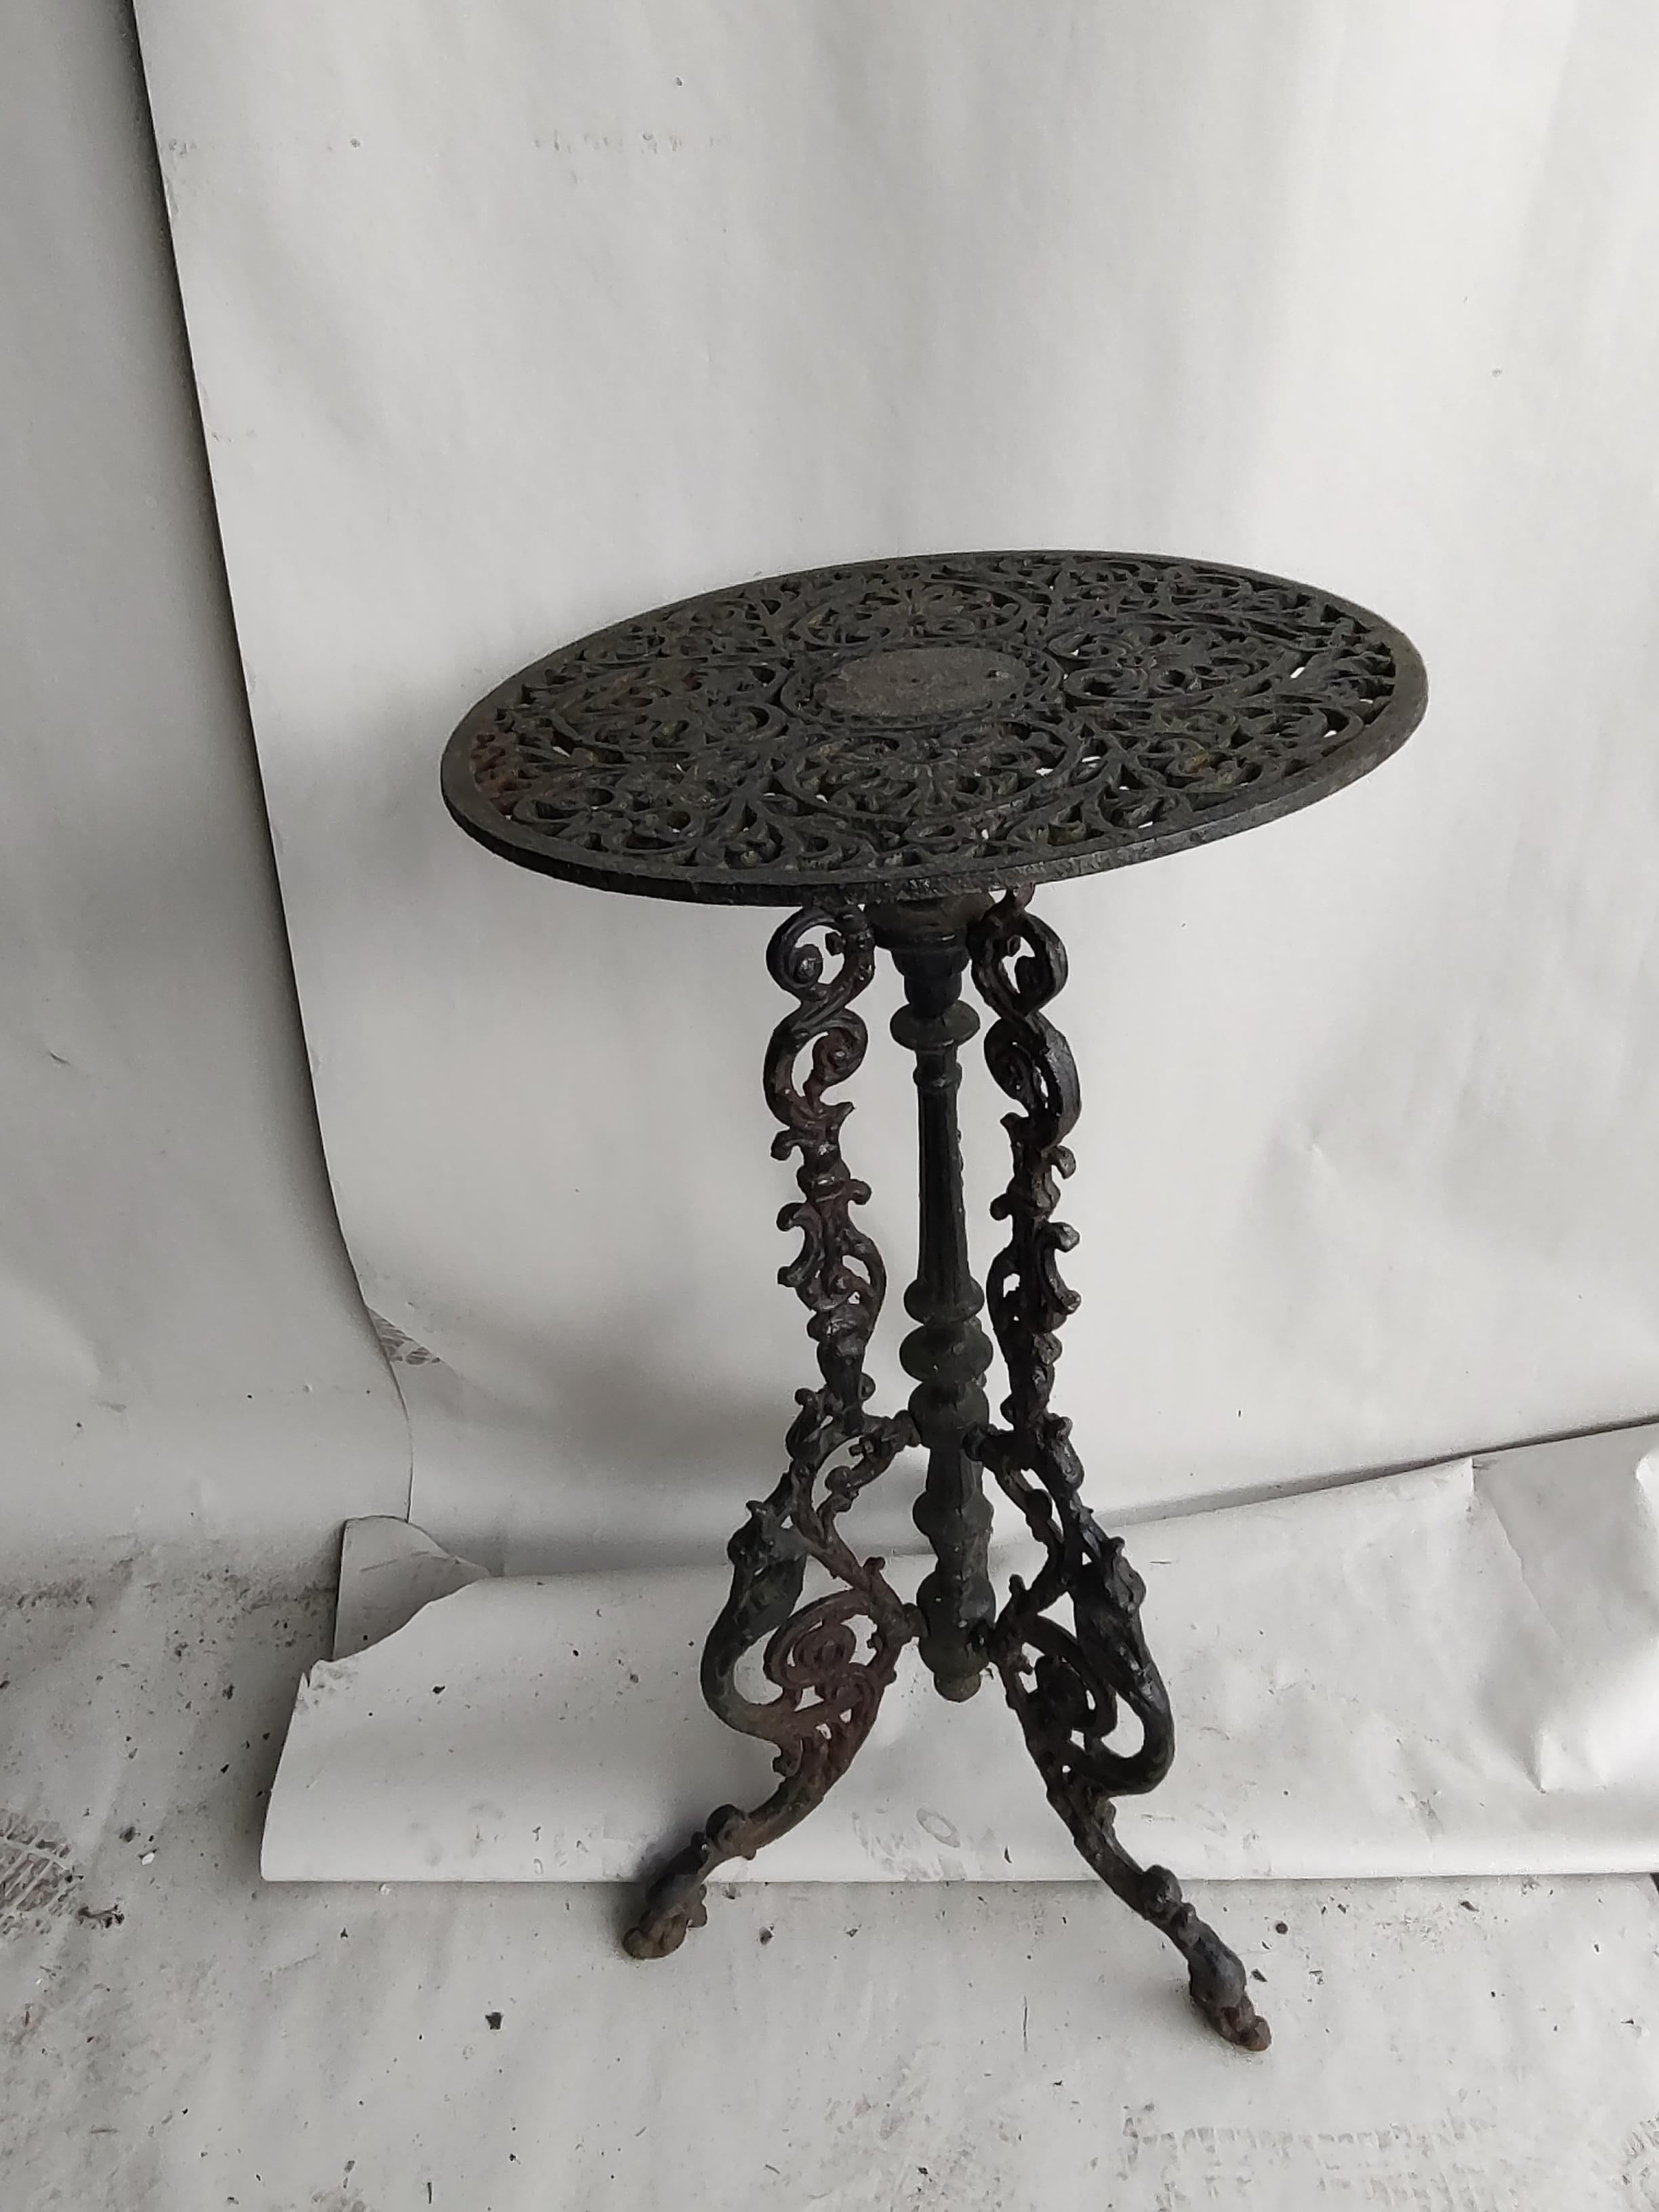 Late Victorian Ornate Cast Iron Garden Side End Table Plant Stand In Good Condition For Sale In Port Jervis, NY